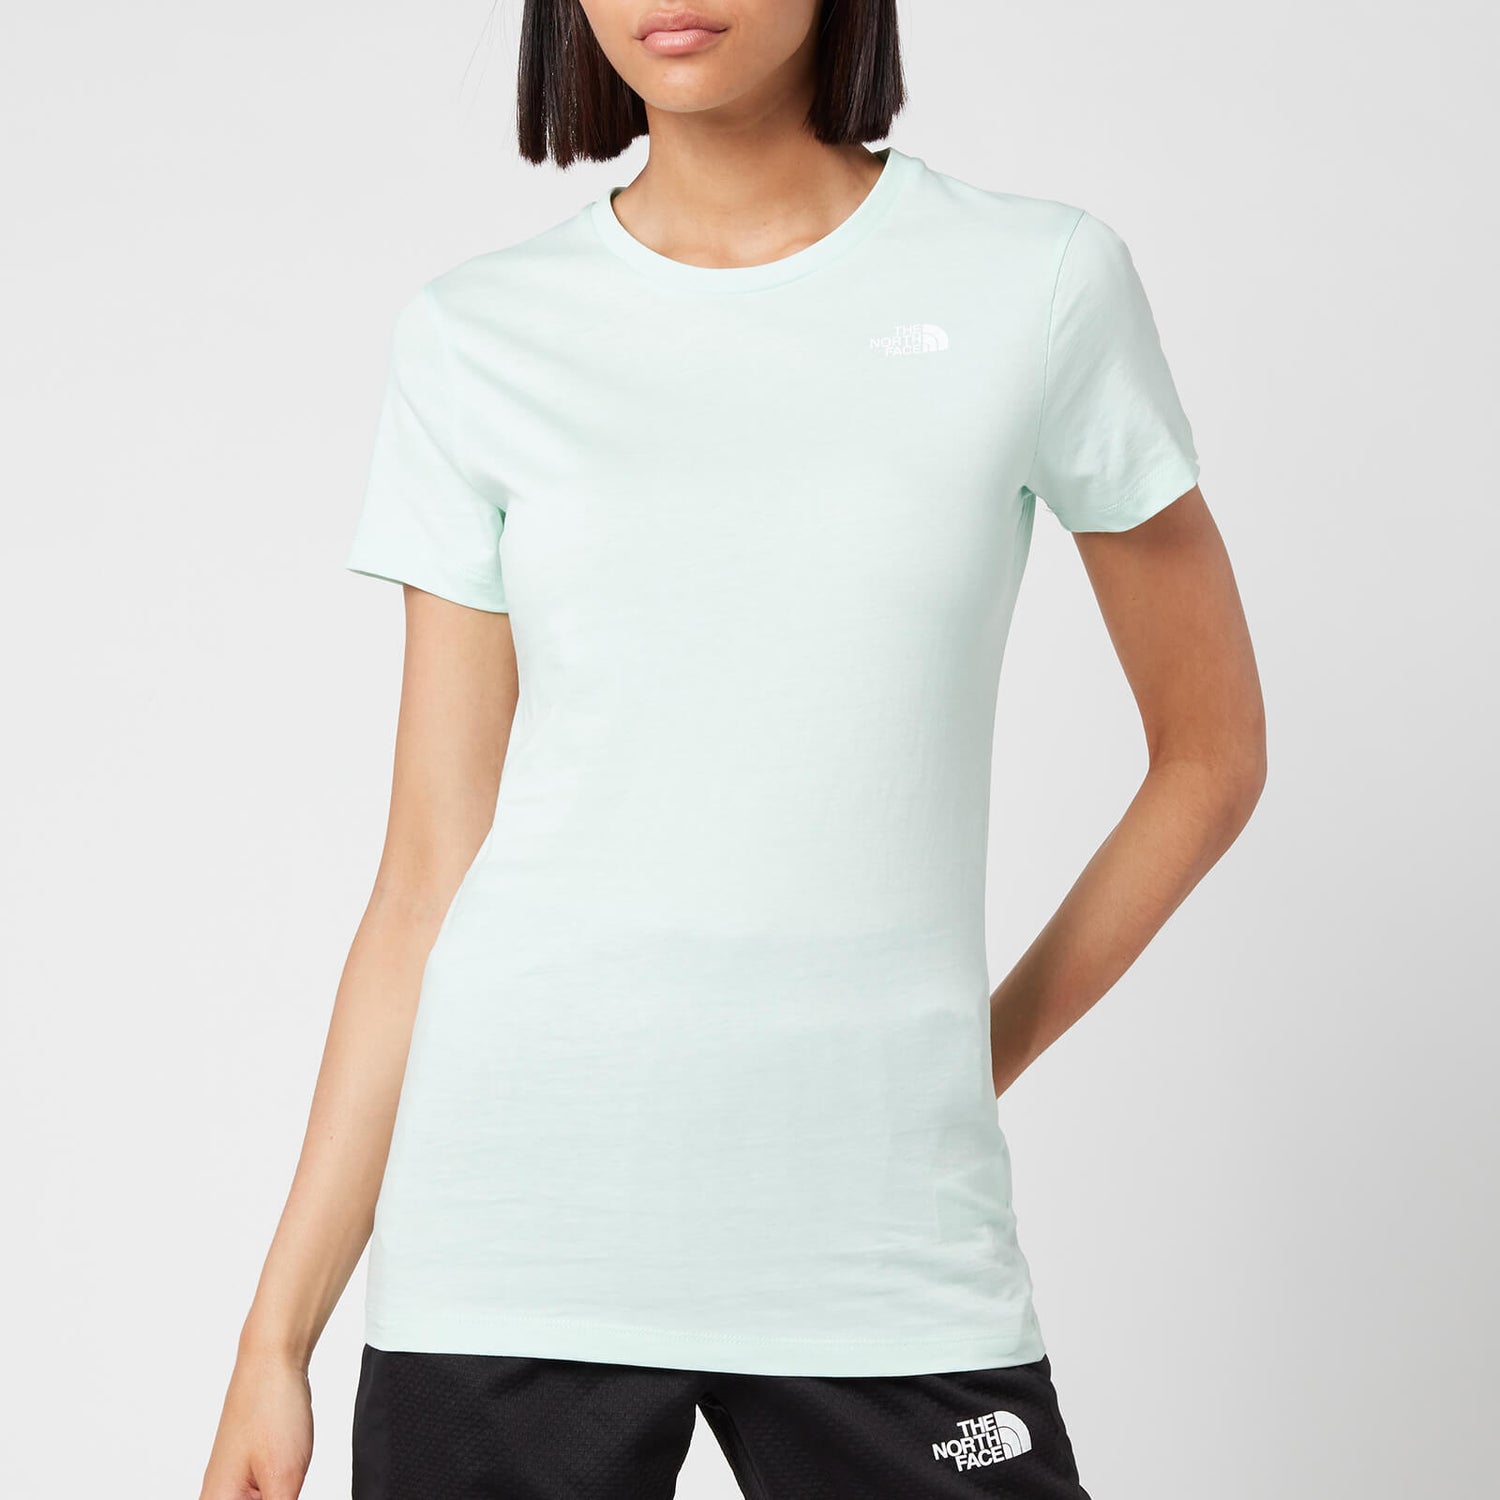 The North Face Women's Simple Dome Short Sleeve T-Shirt - Misty Jade